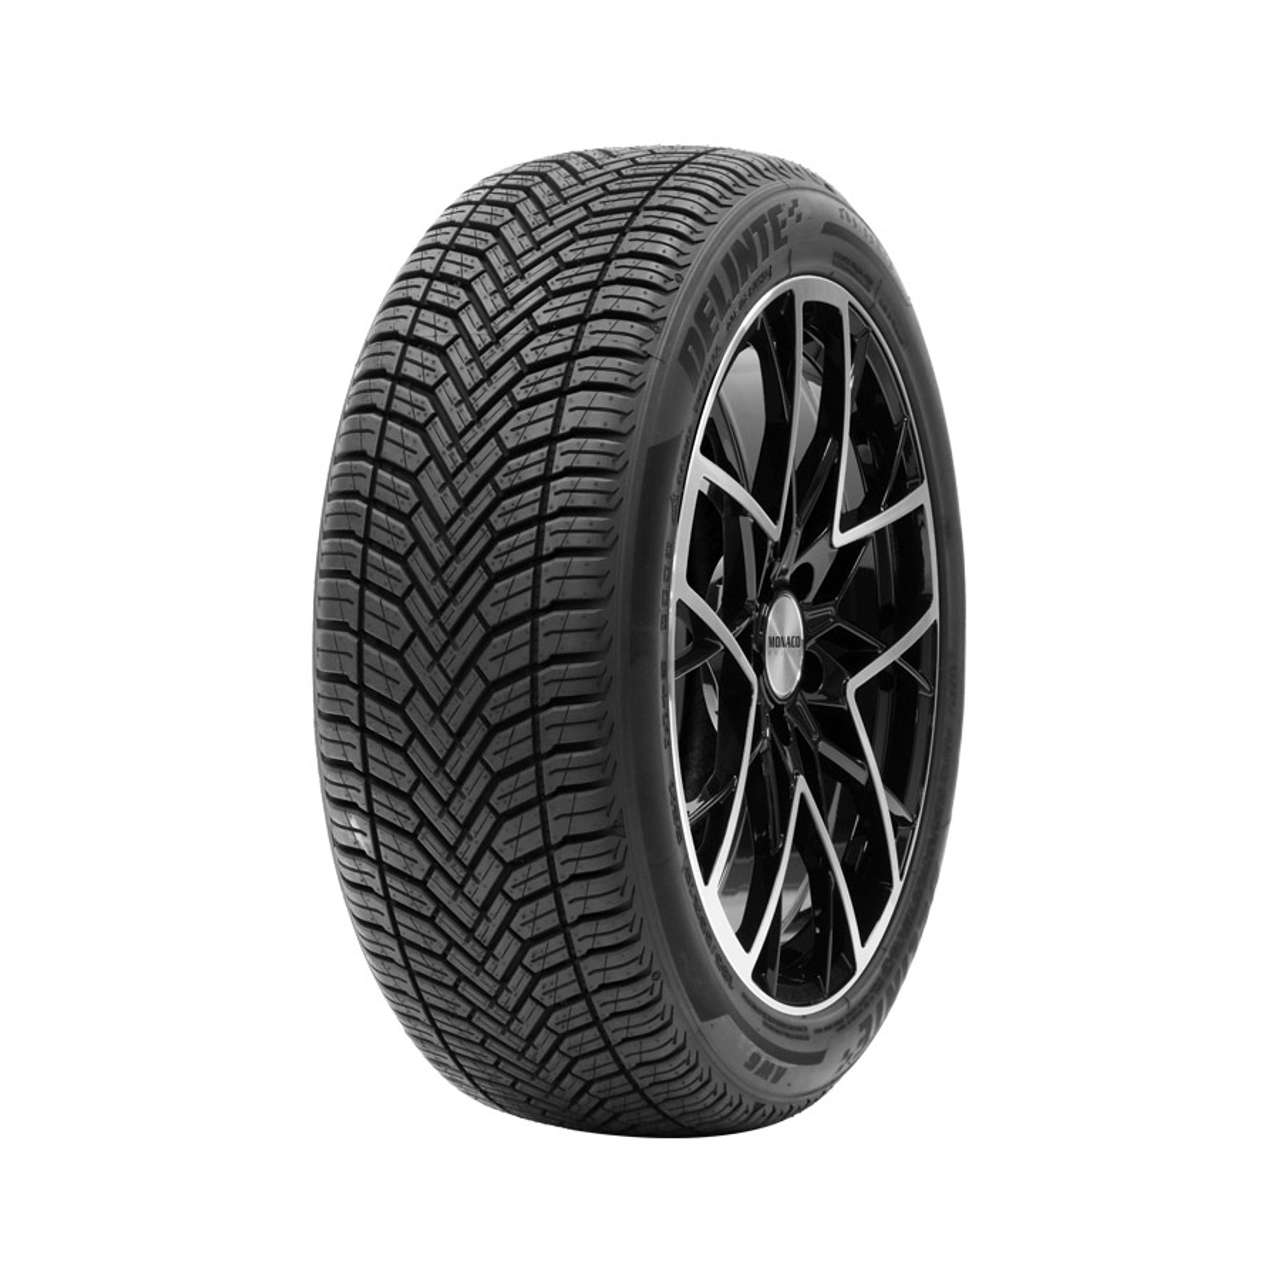 DELINTE AW6 155/65R14 75T BSW